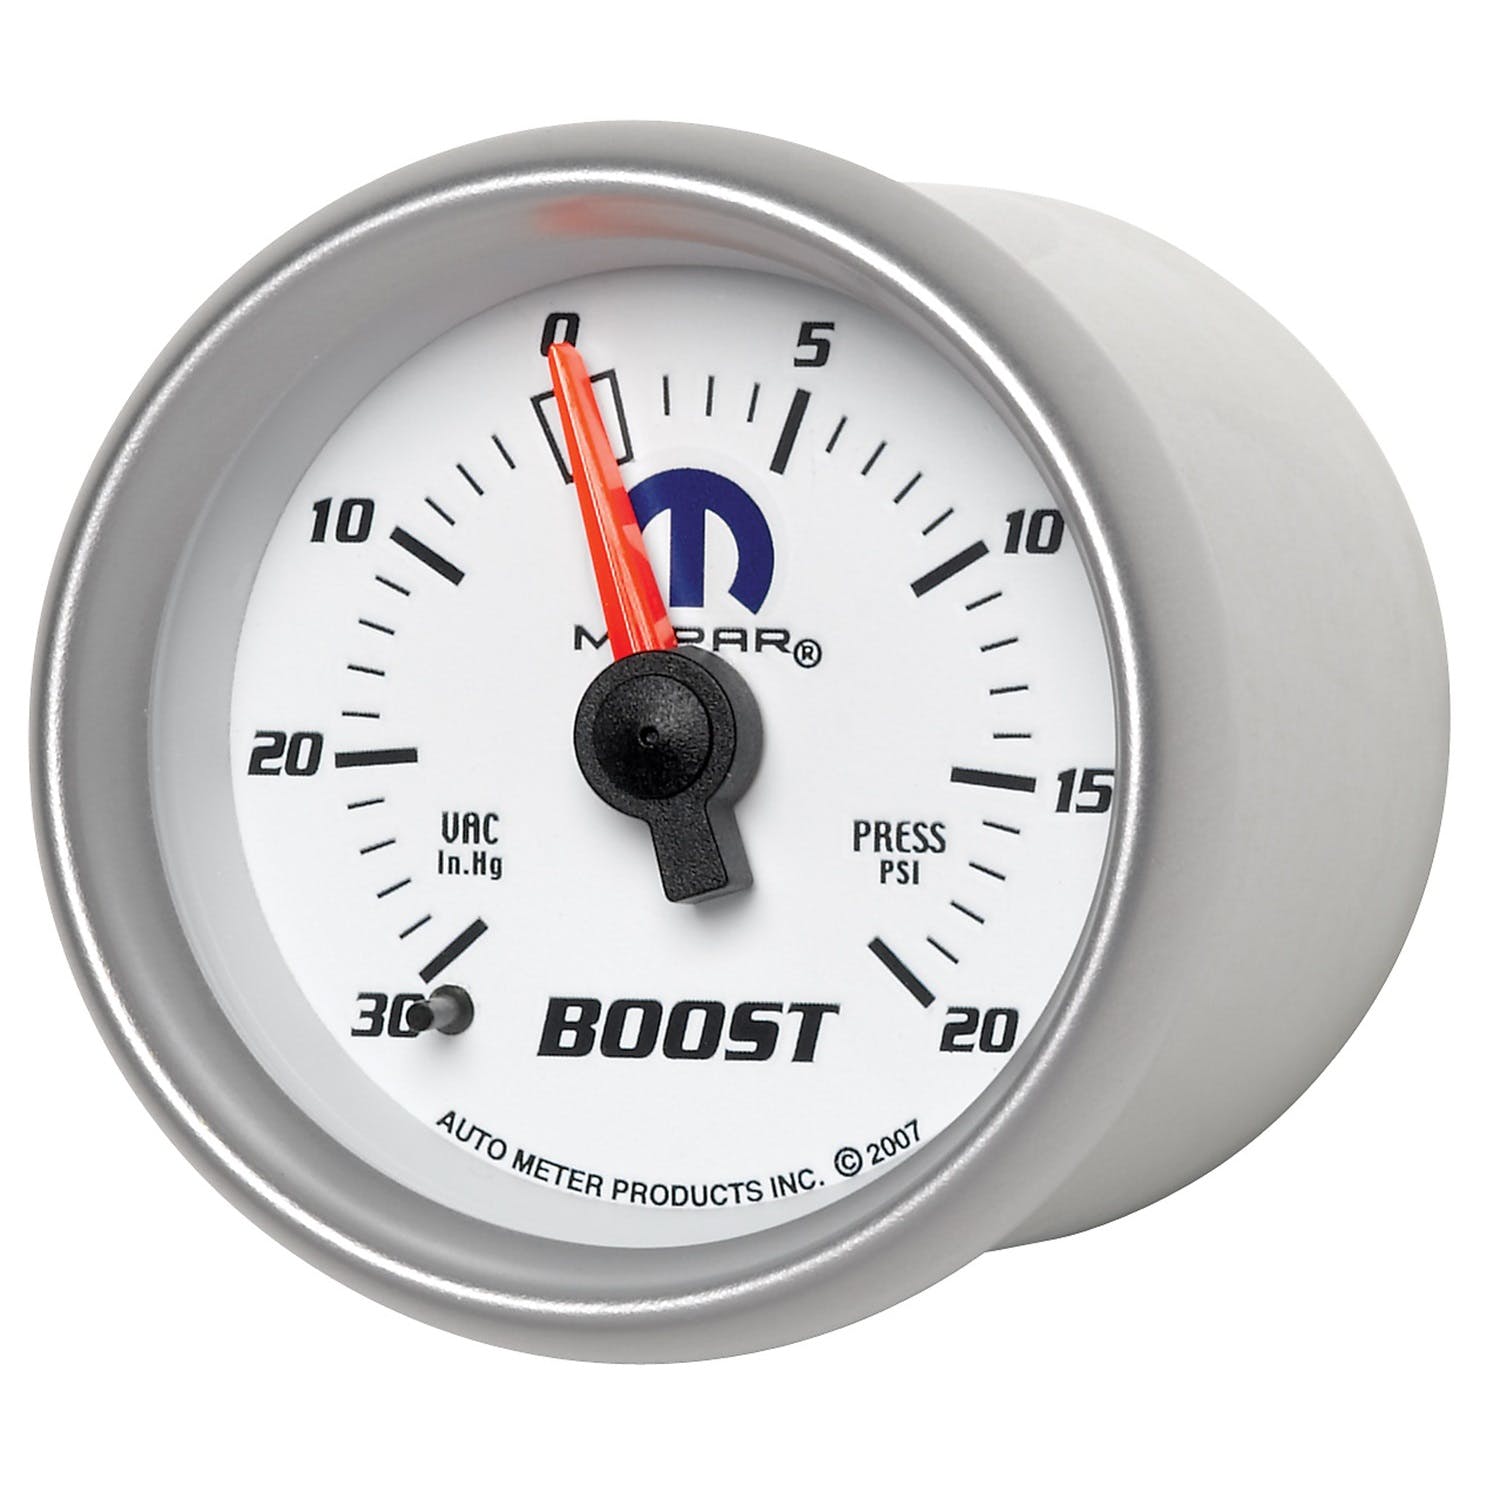 AutoMeter Products 880026 Mopar Mechanical Boost/Vacuum Gauge 2 1/16in. 30in. Hg./20 psi Includes 6ft.